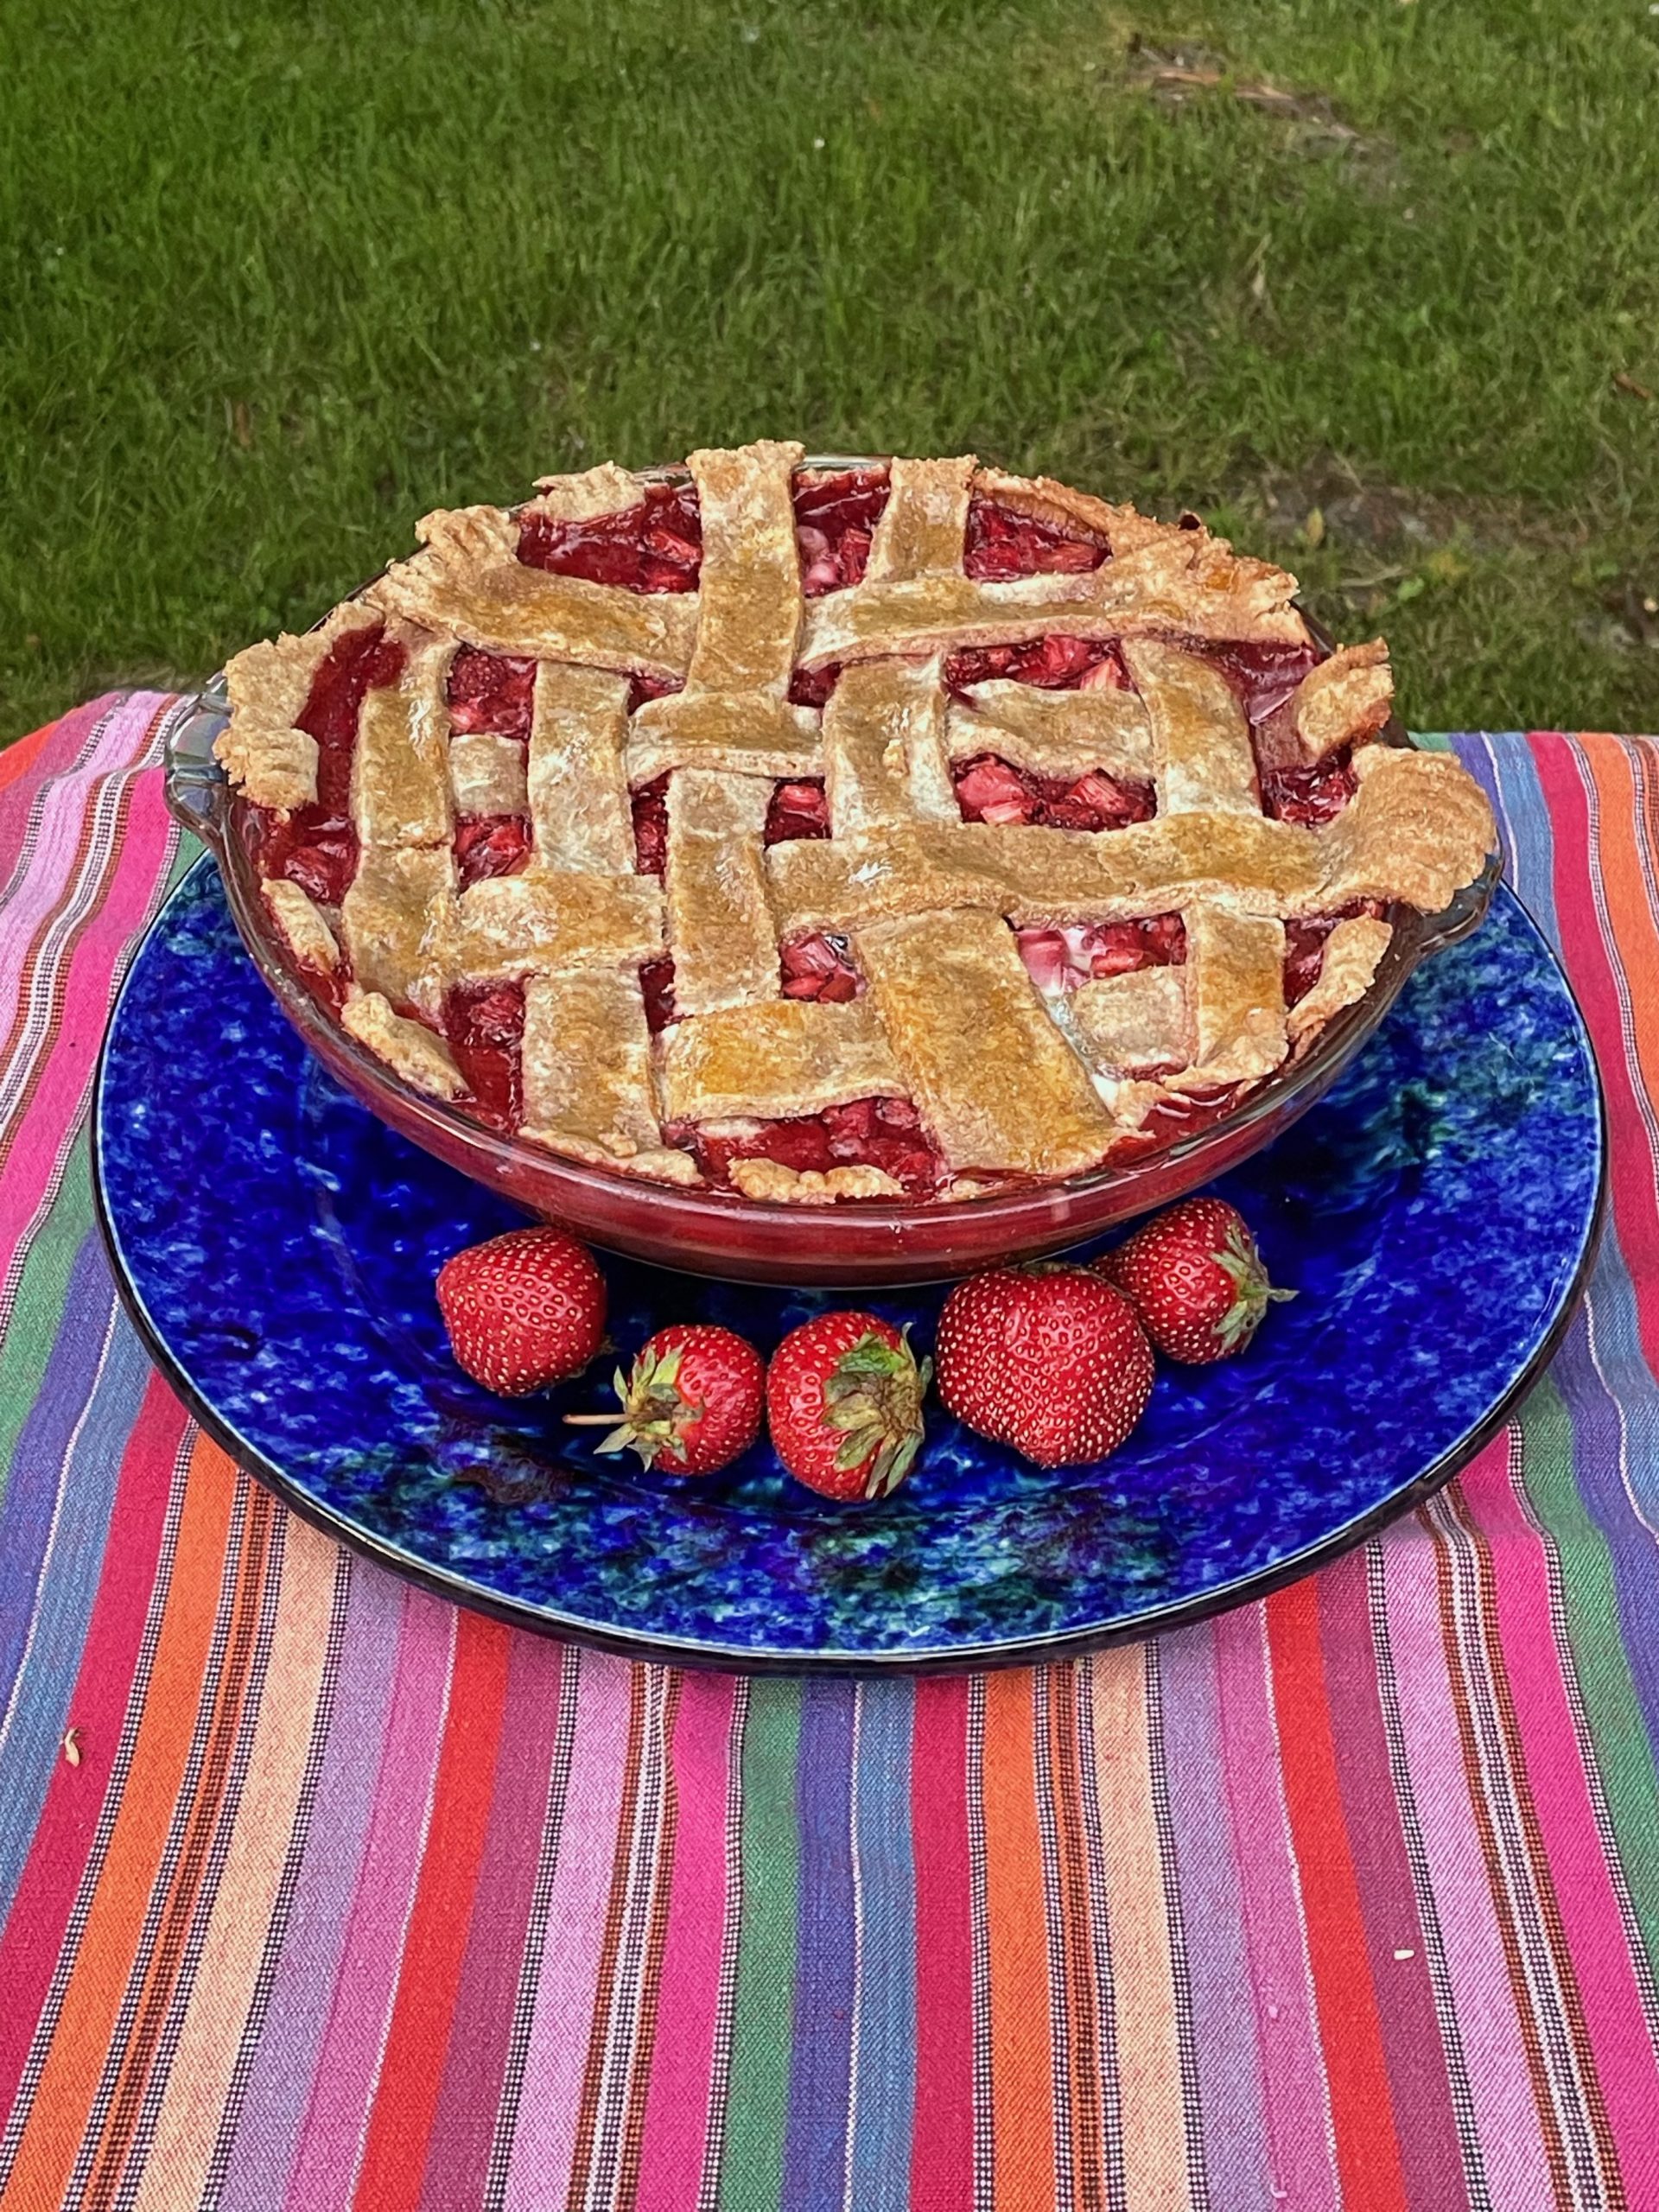 Strawberry rhubarb pie made with all local ingredients, except the cornstarch. (tip: switch sugar out for honey).